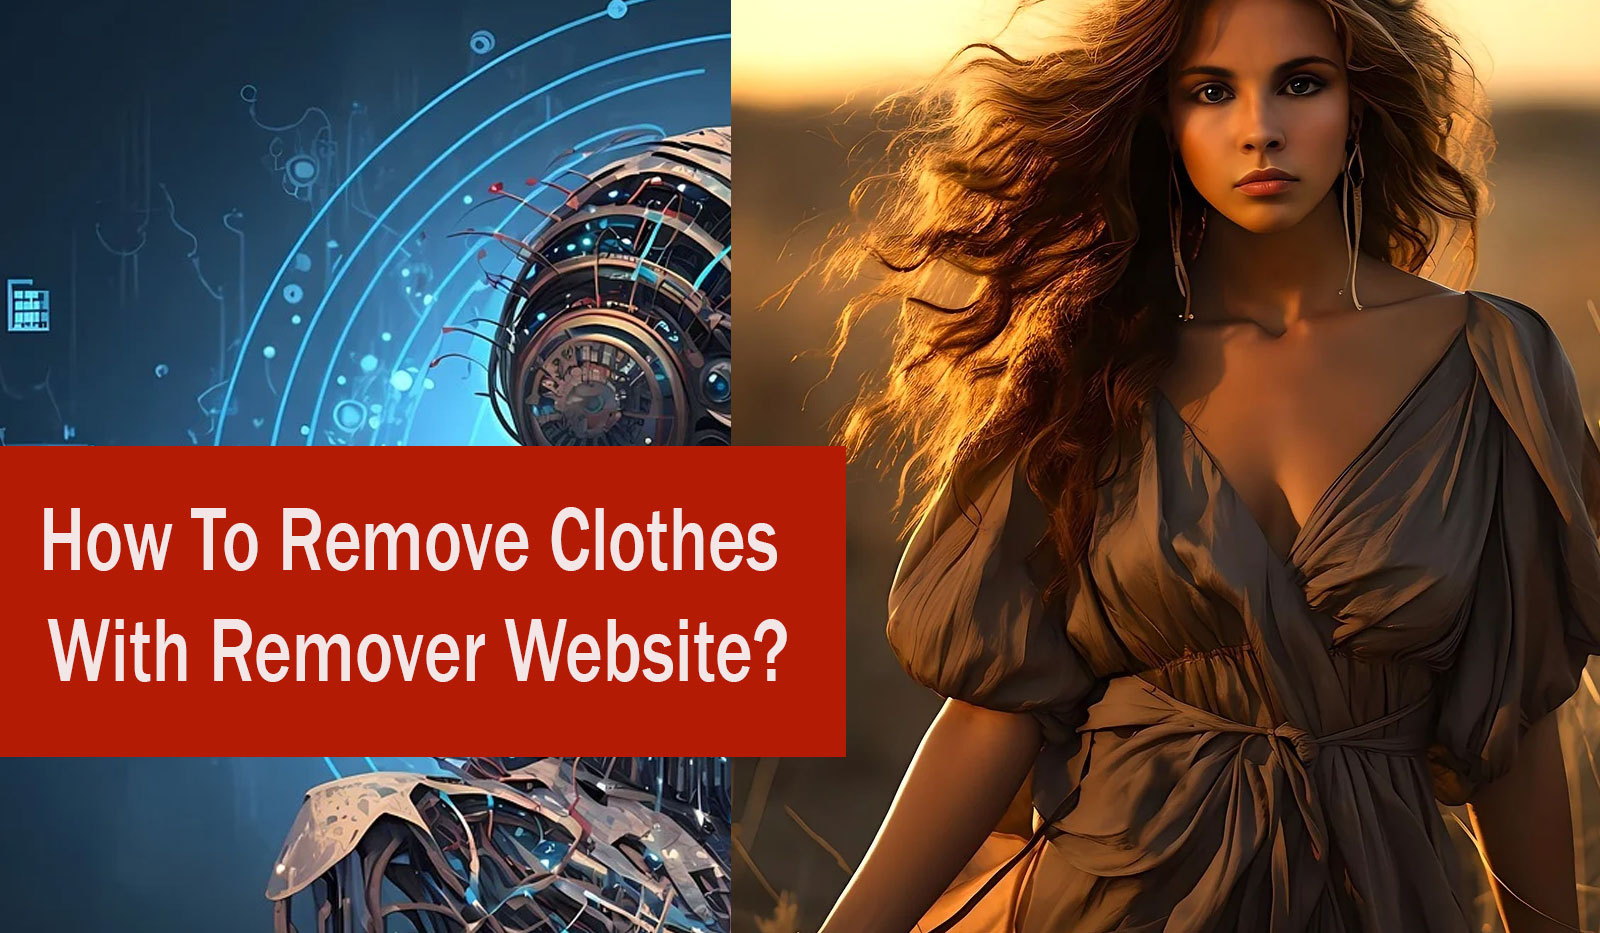 How To Remove Clothes With Remover Website?